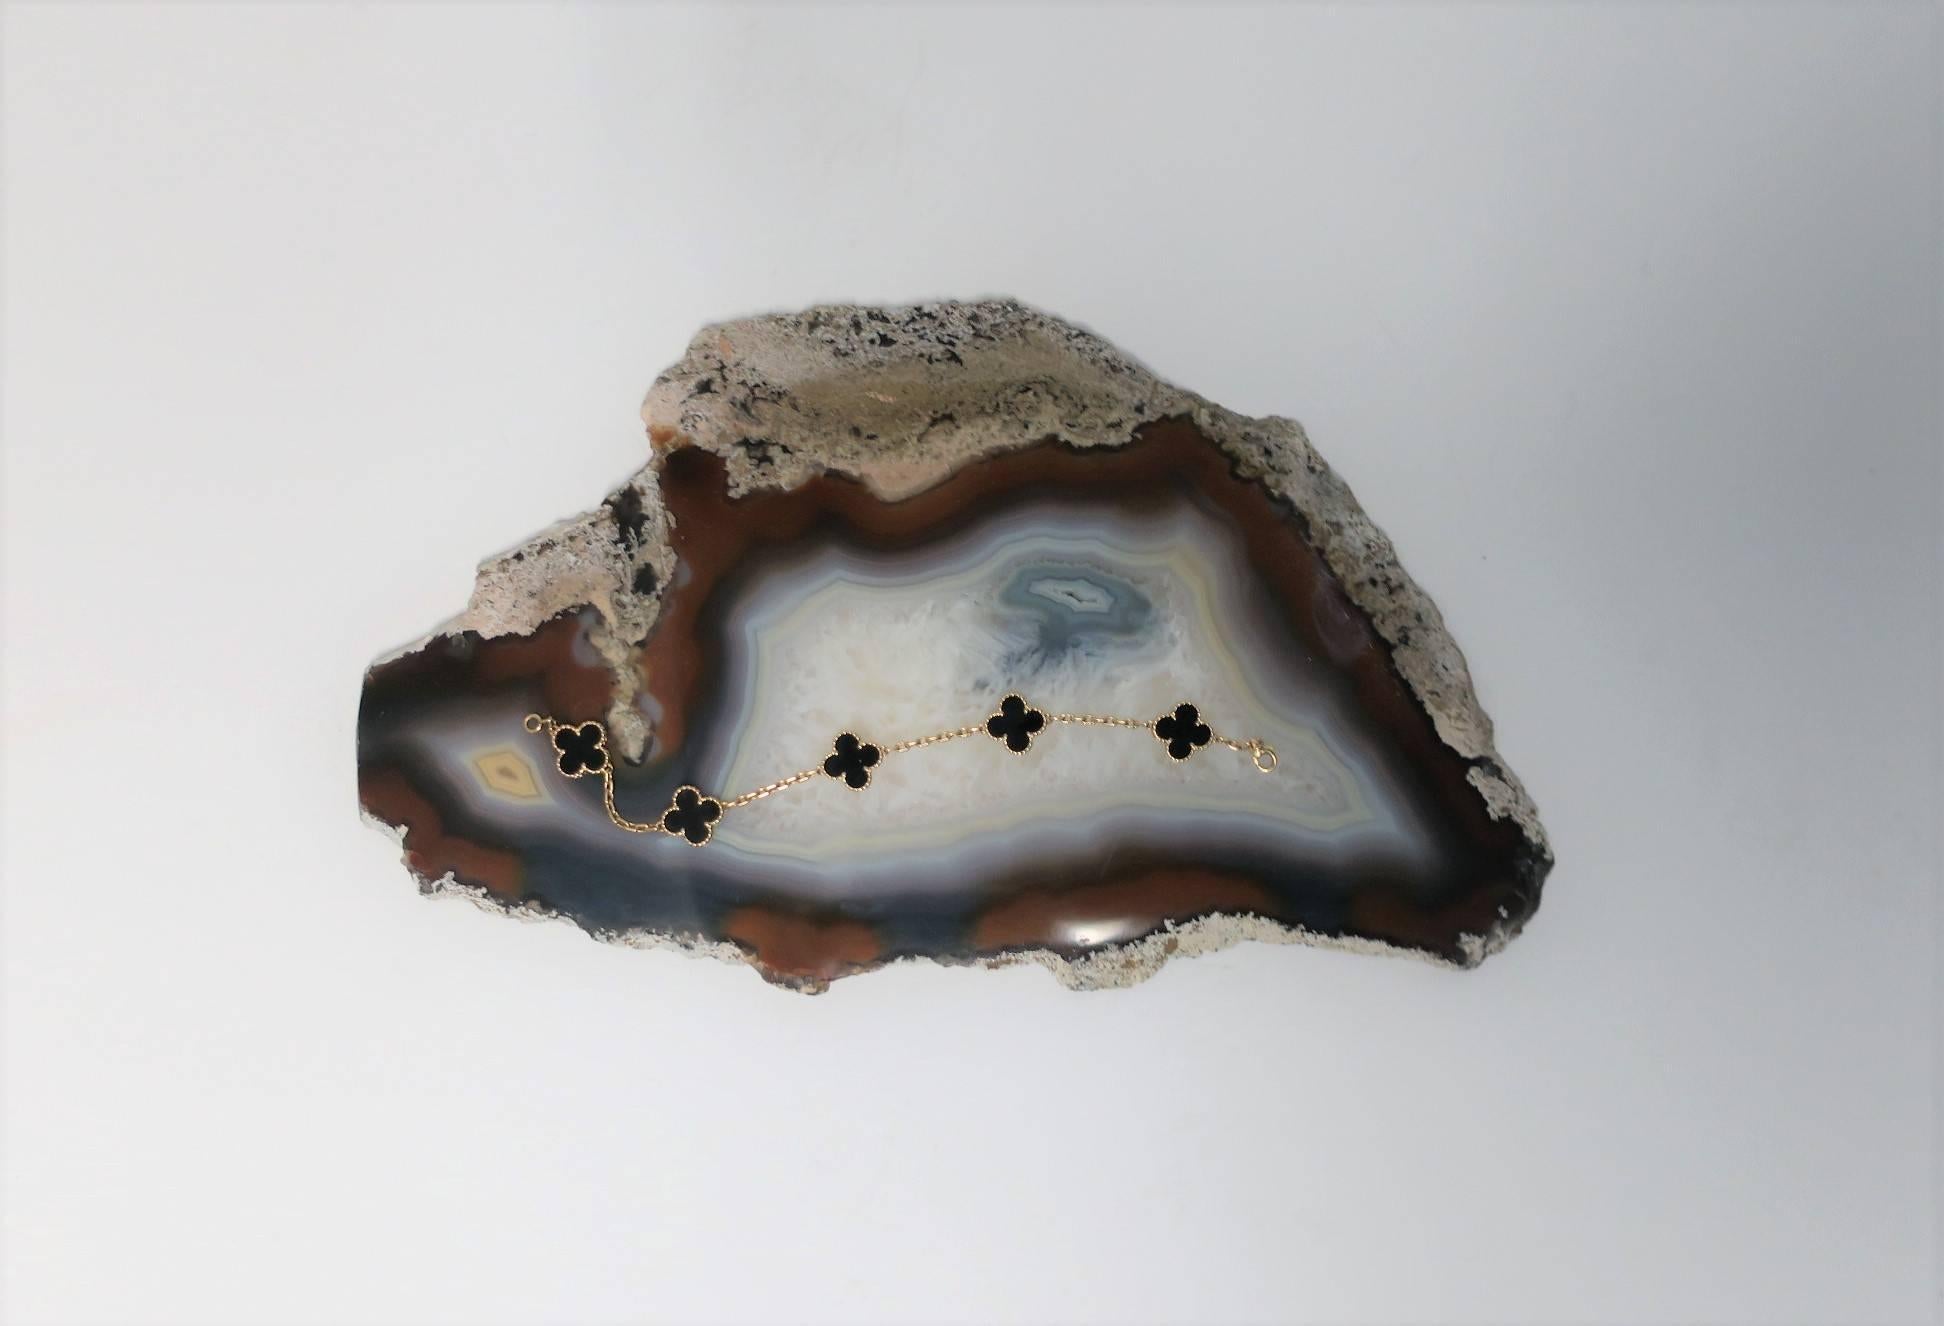 Organic Modern Blue and White Agate Onyx Decorative Object Tray